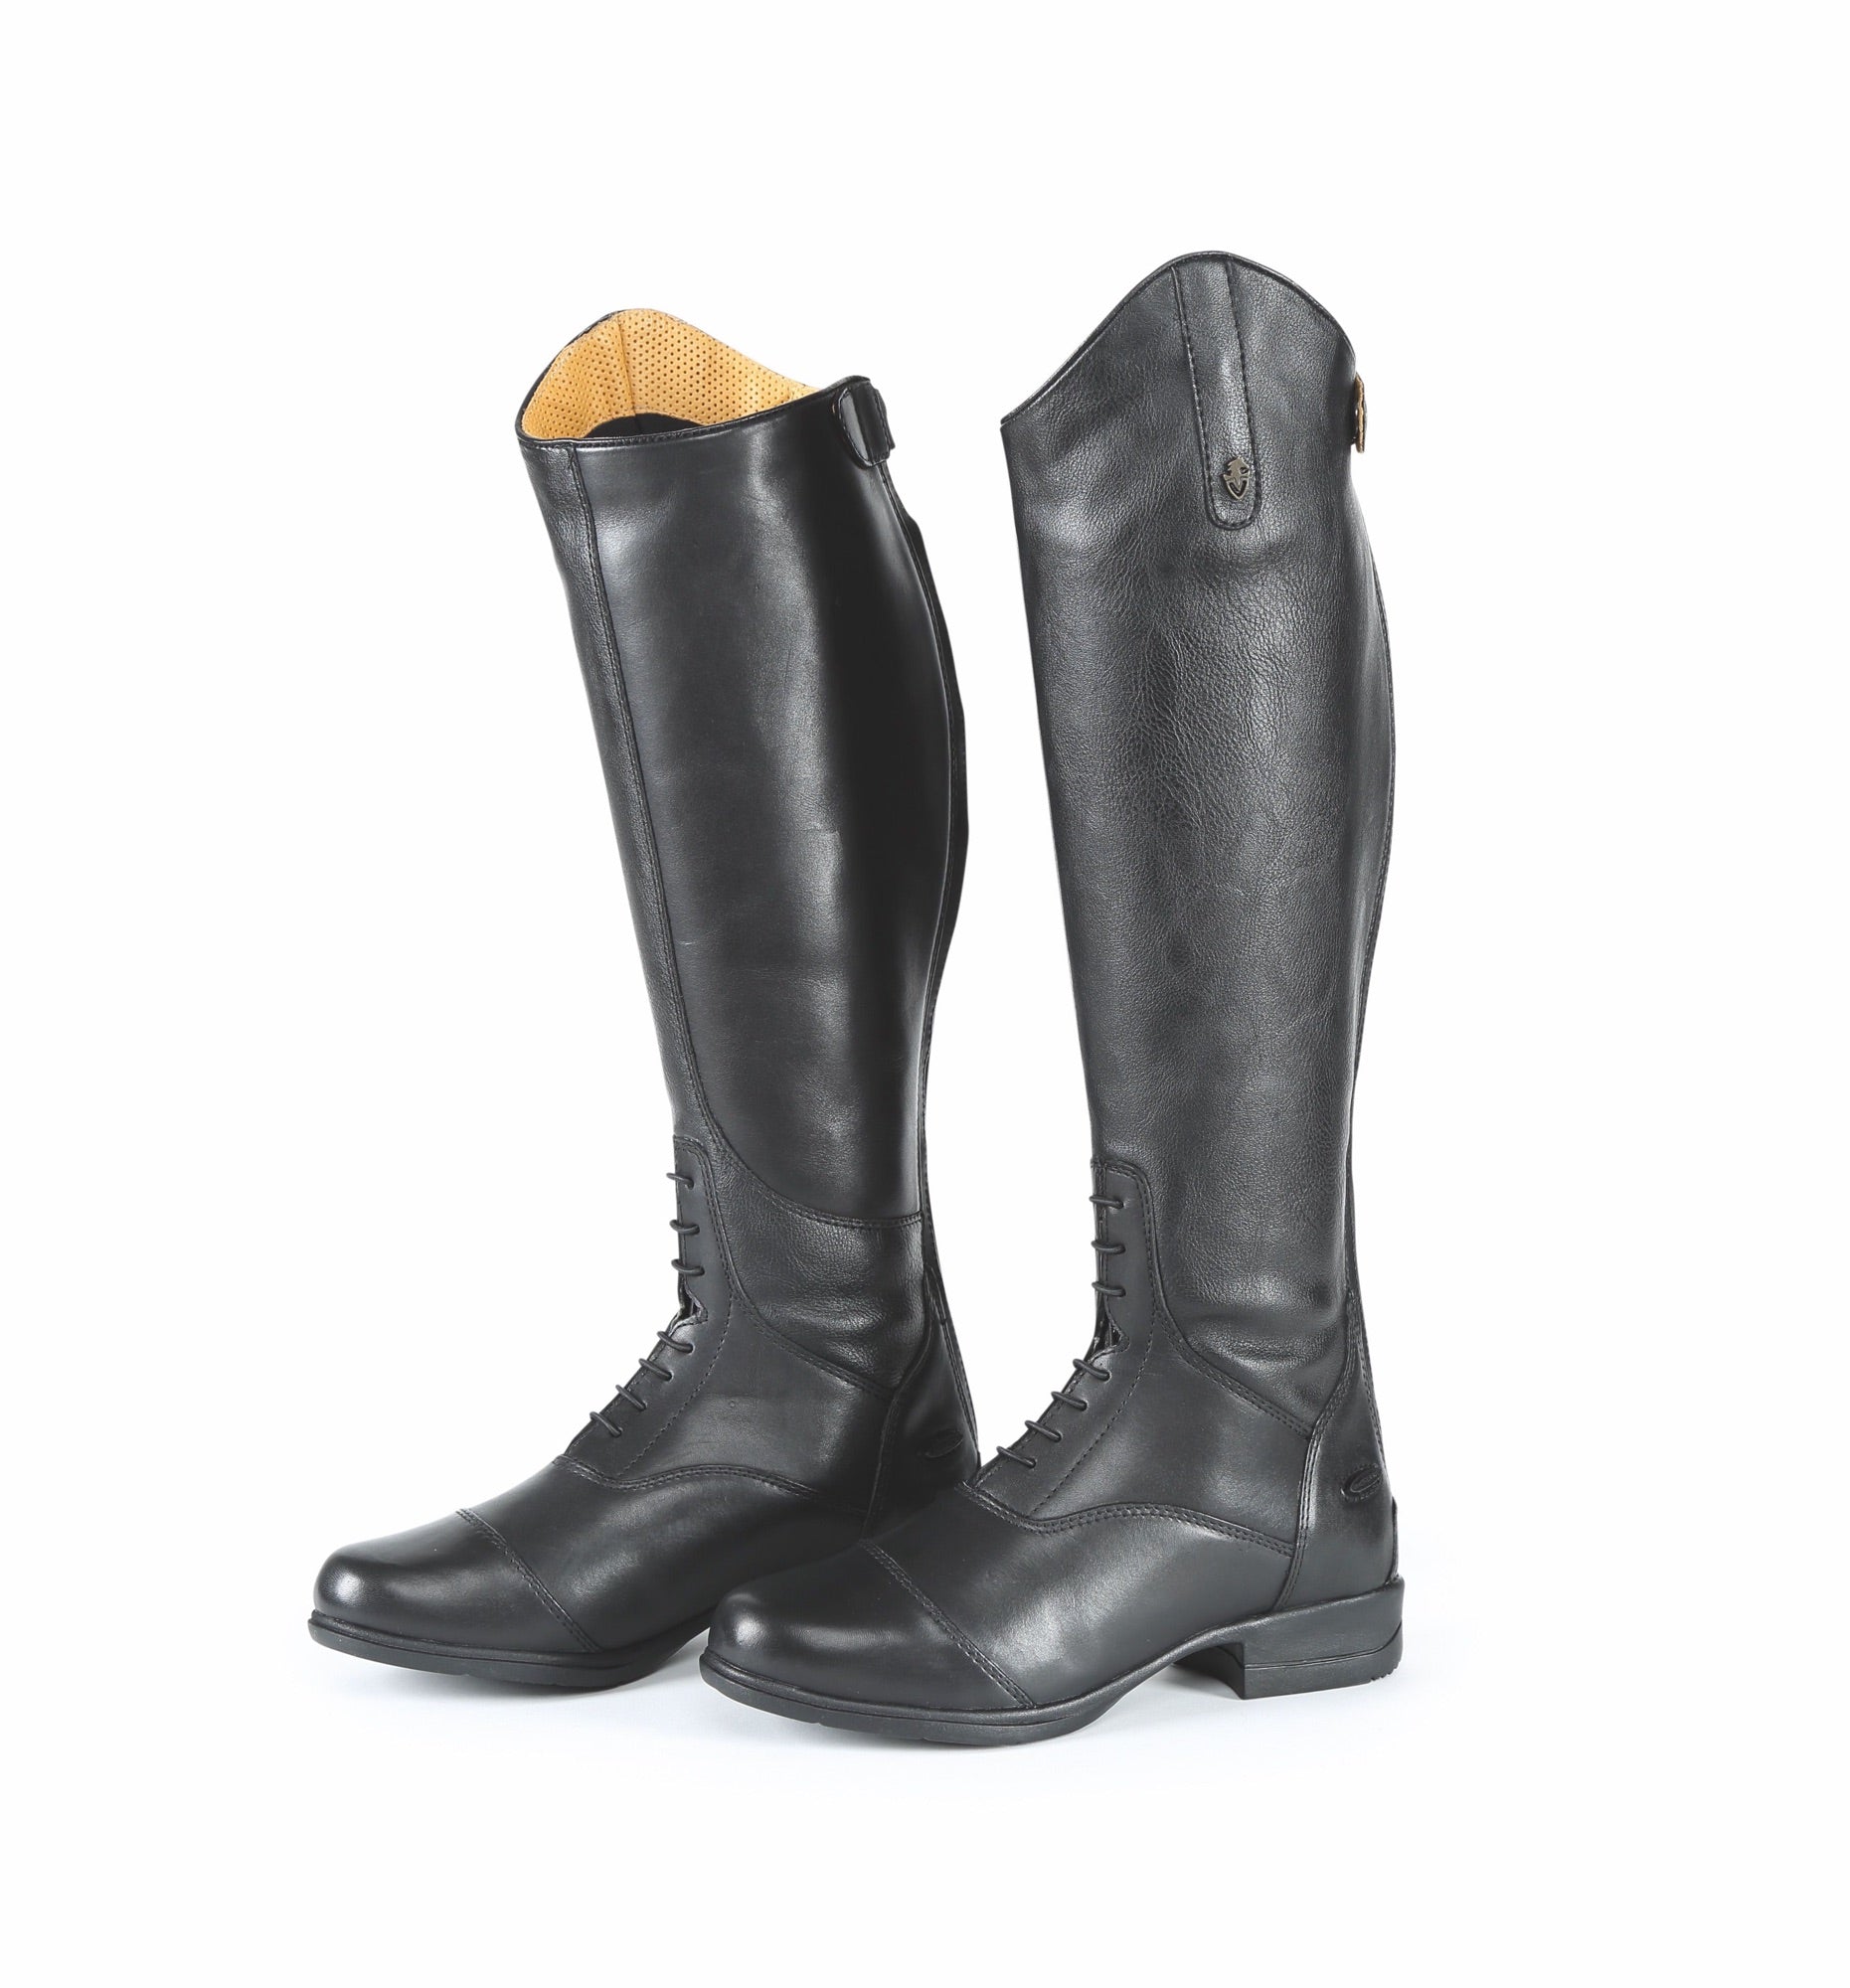 Shires Moretta Gianna Riding Boots